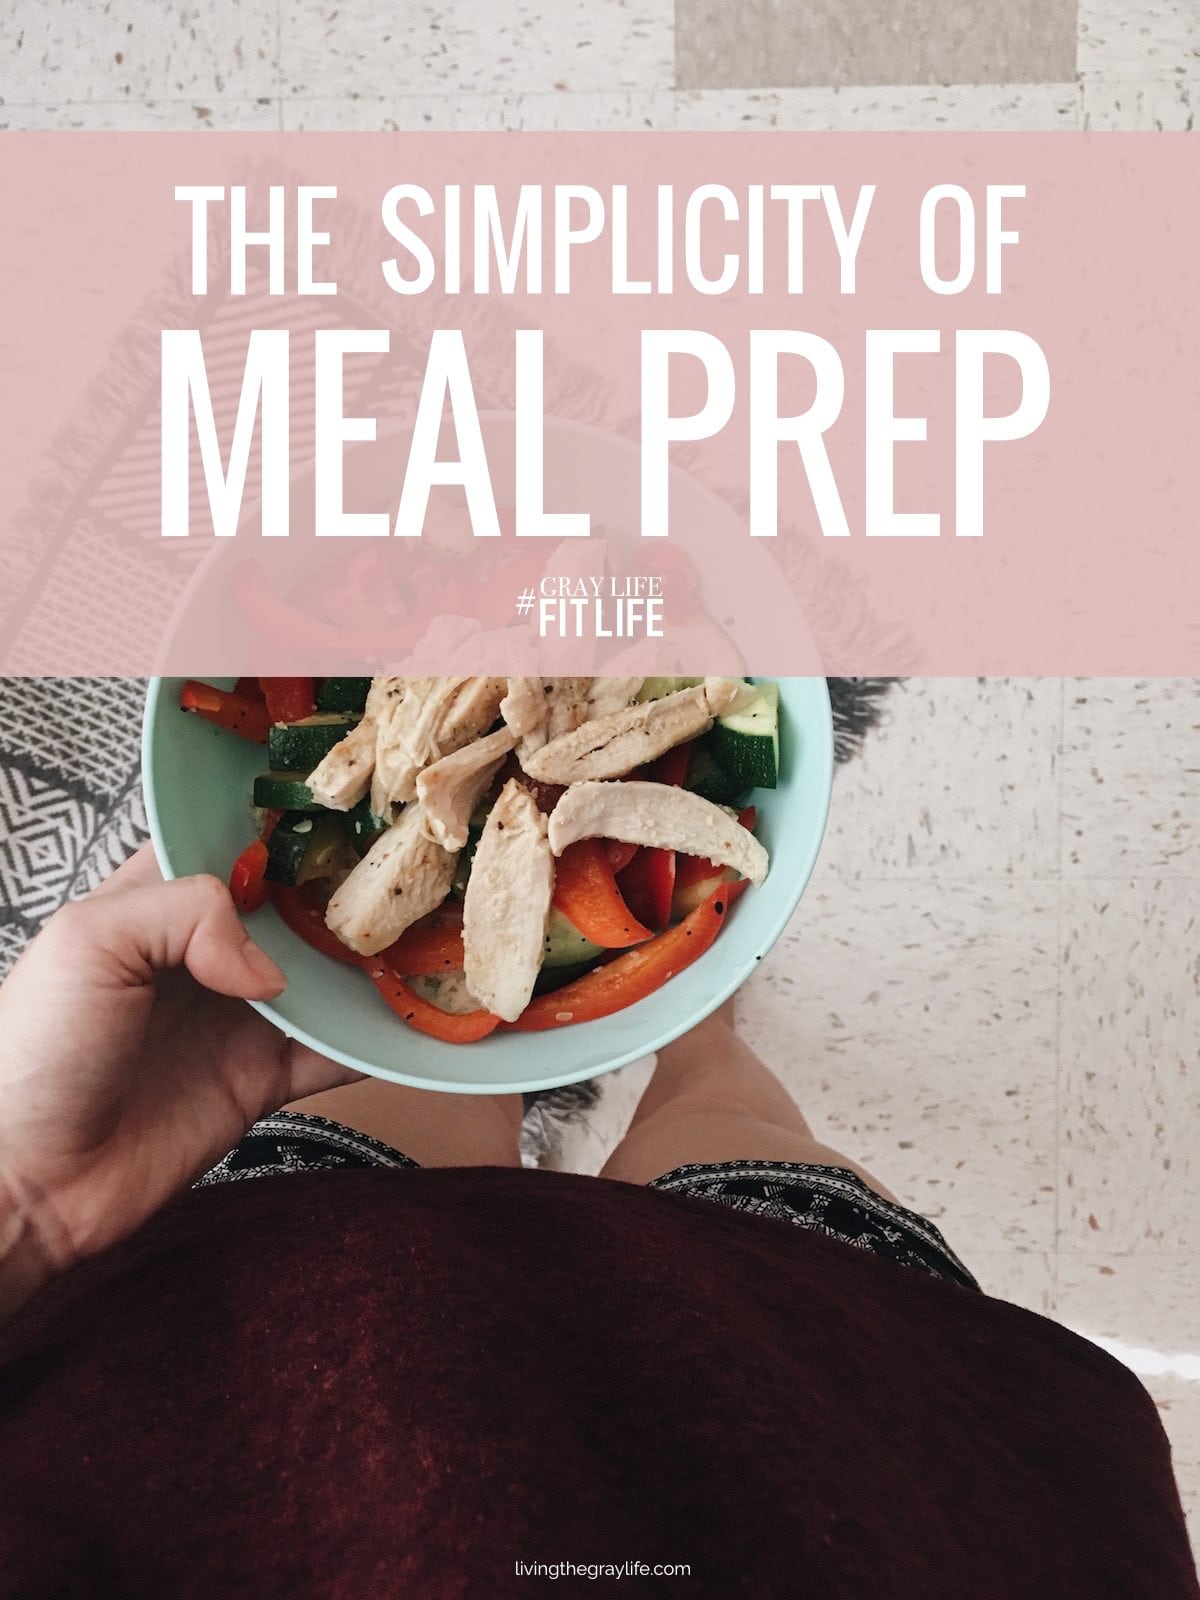 The Simplicity of Meal Prep